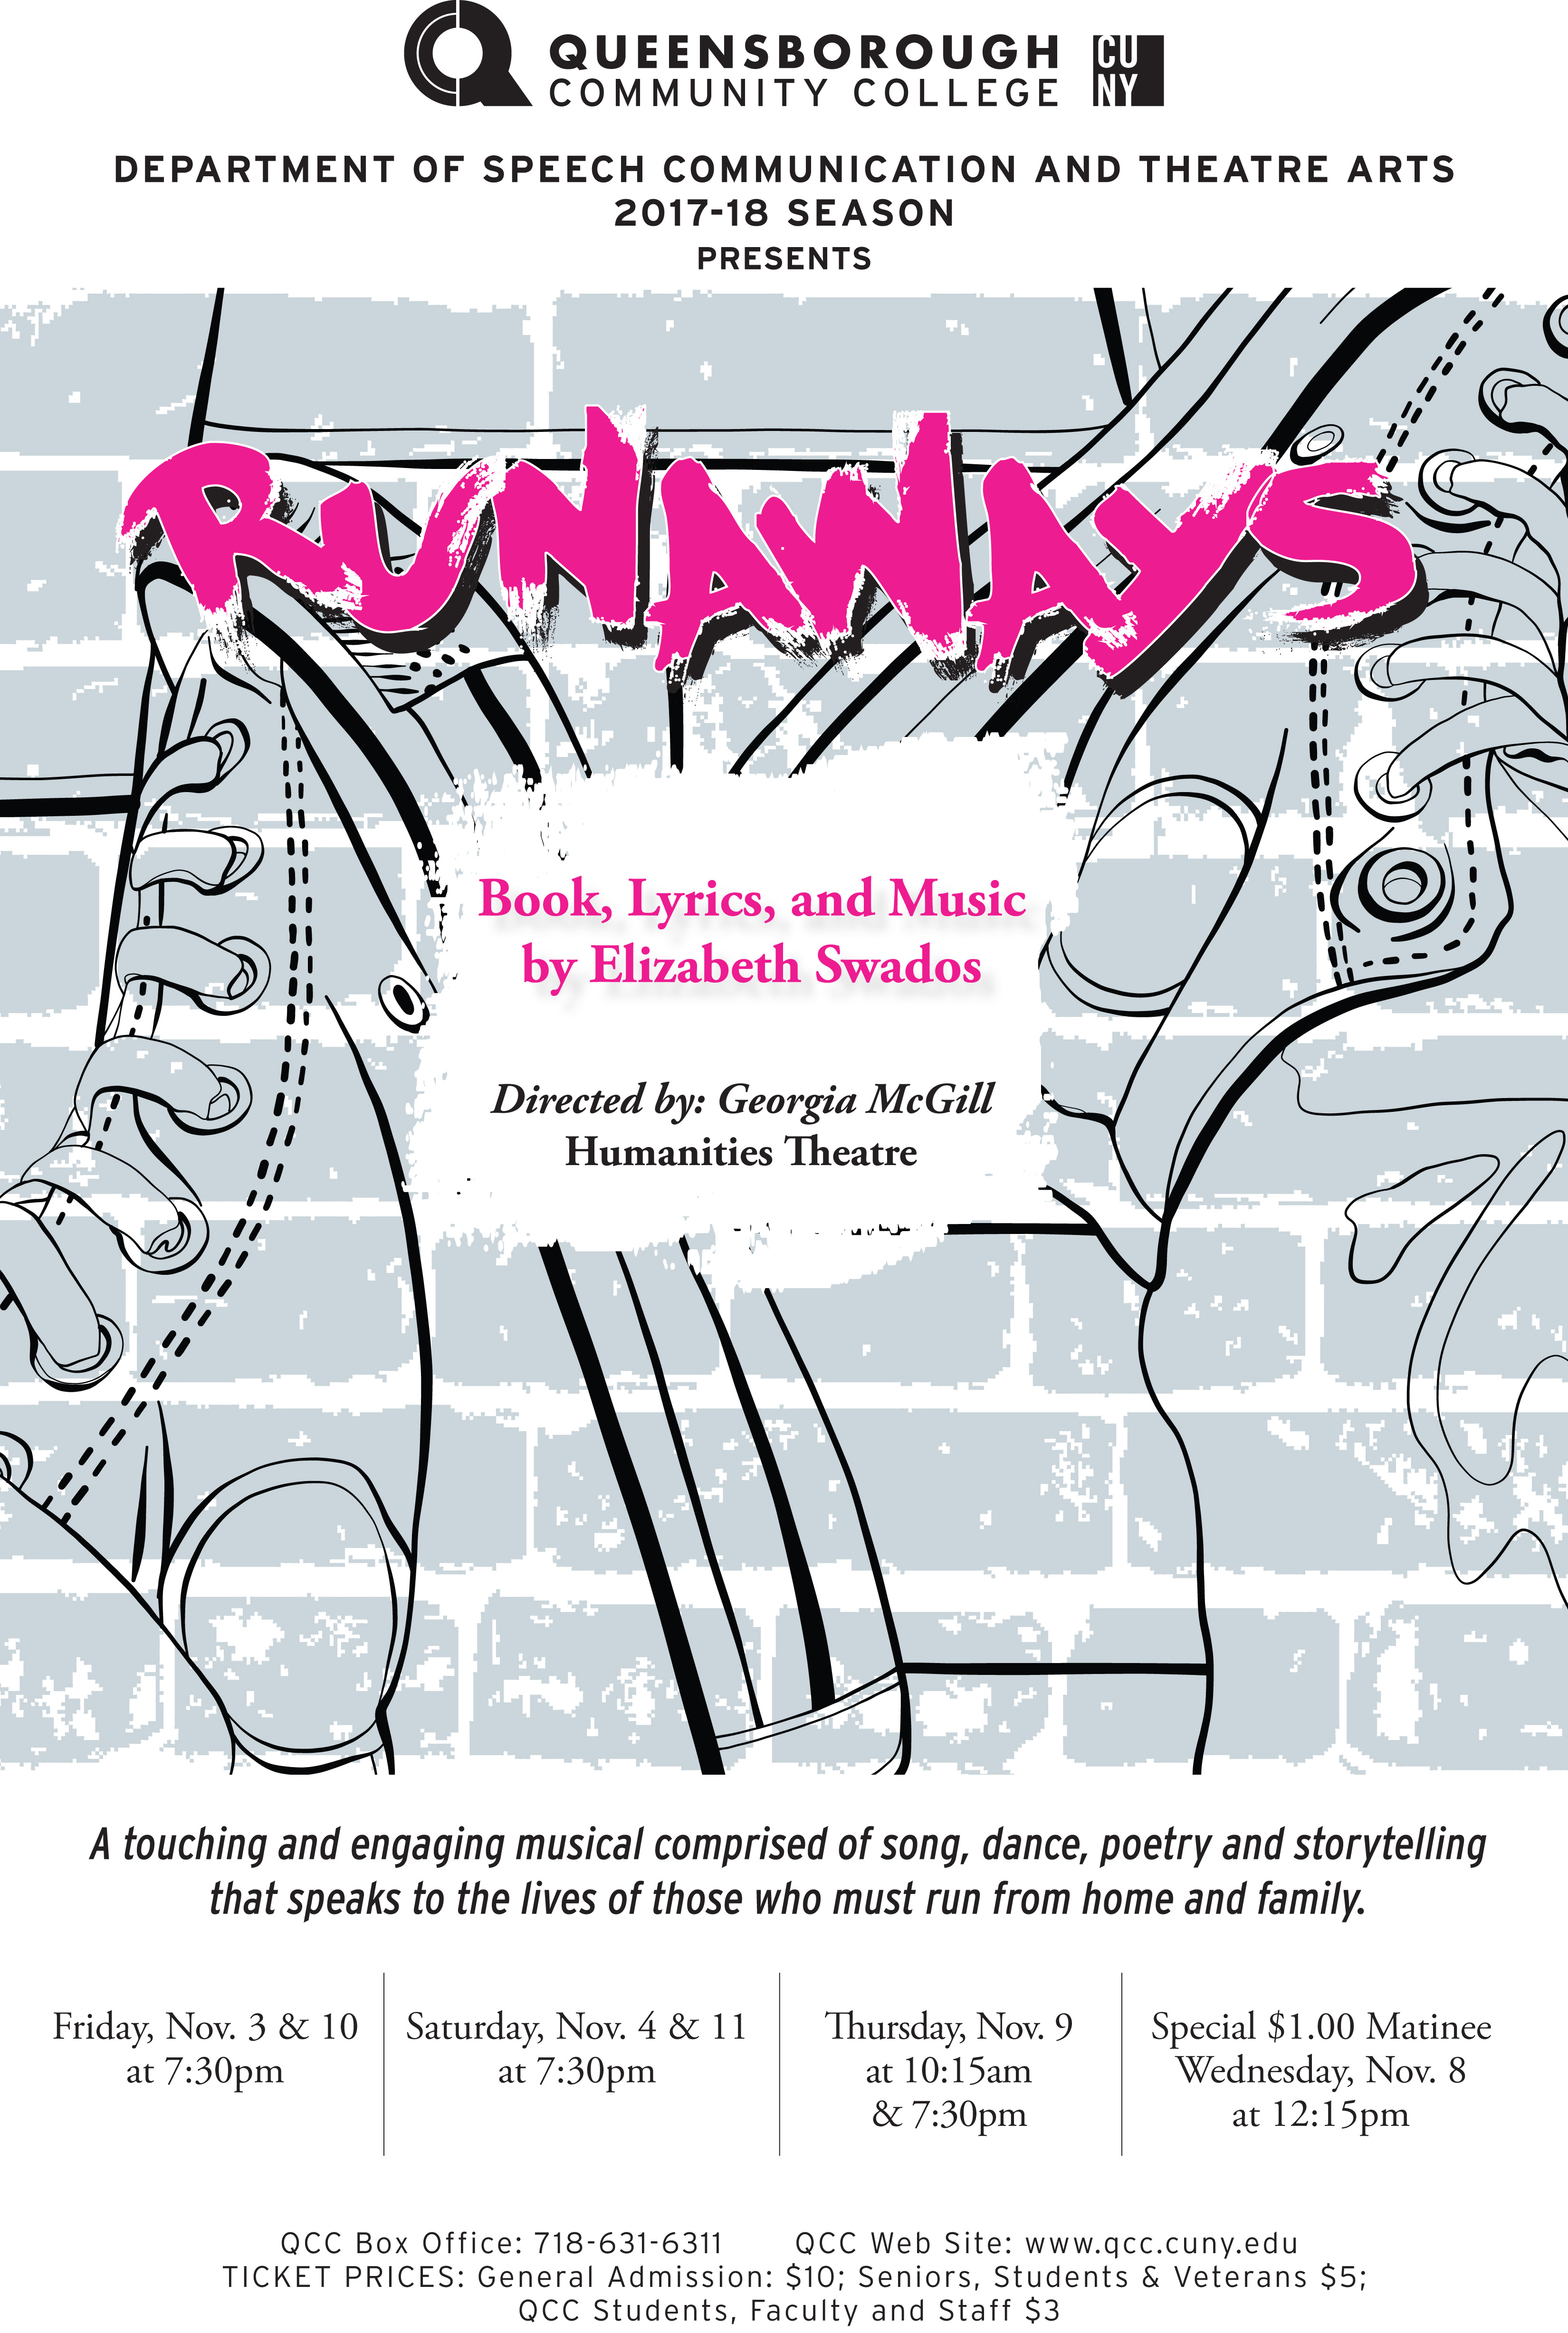 This is a poster for the past fall 2017 production of ‘Runaways’, book, lyrics, and music by Elizabeth Swados, and directed by Professor McGill. The poster displays a pair of sneakers resting on a brick wall.